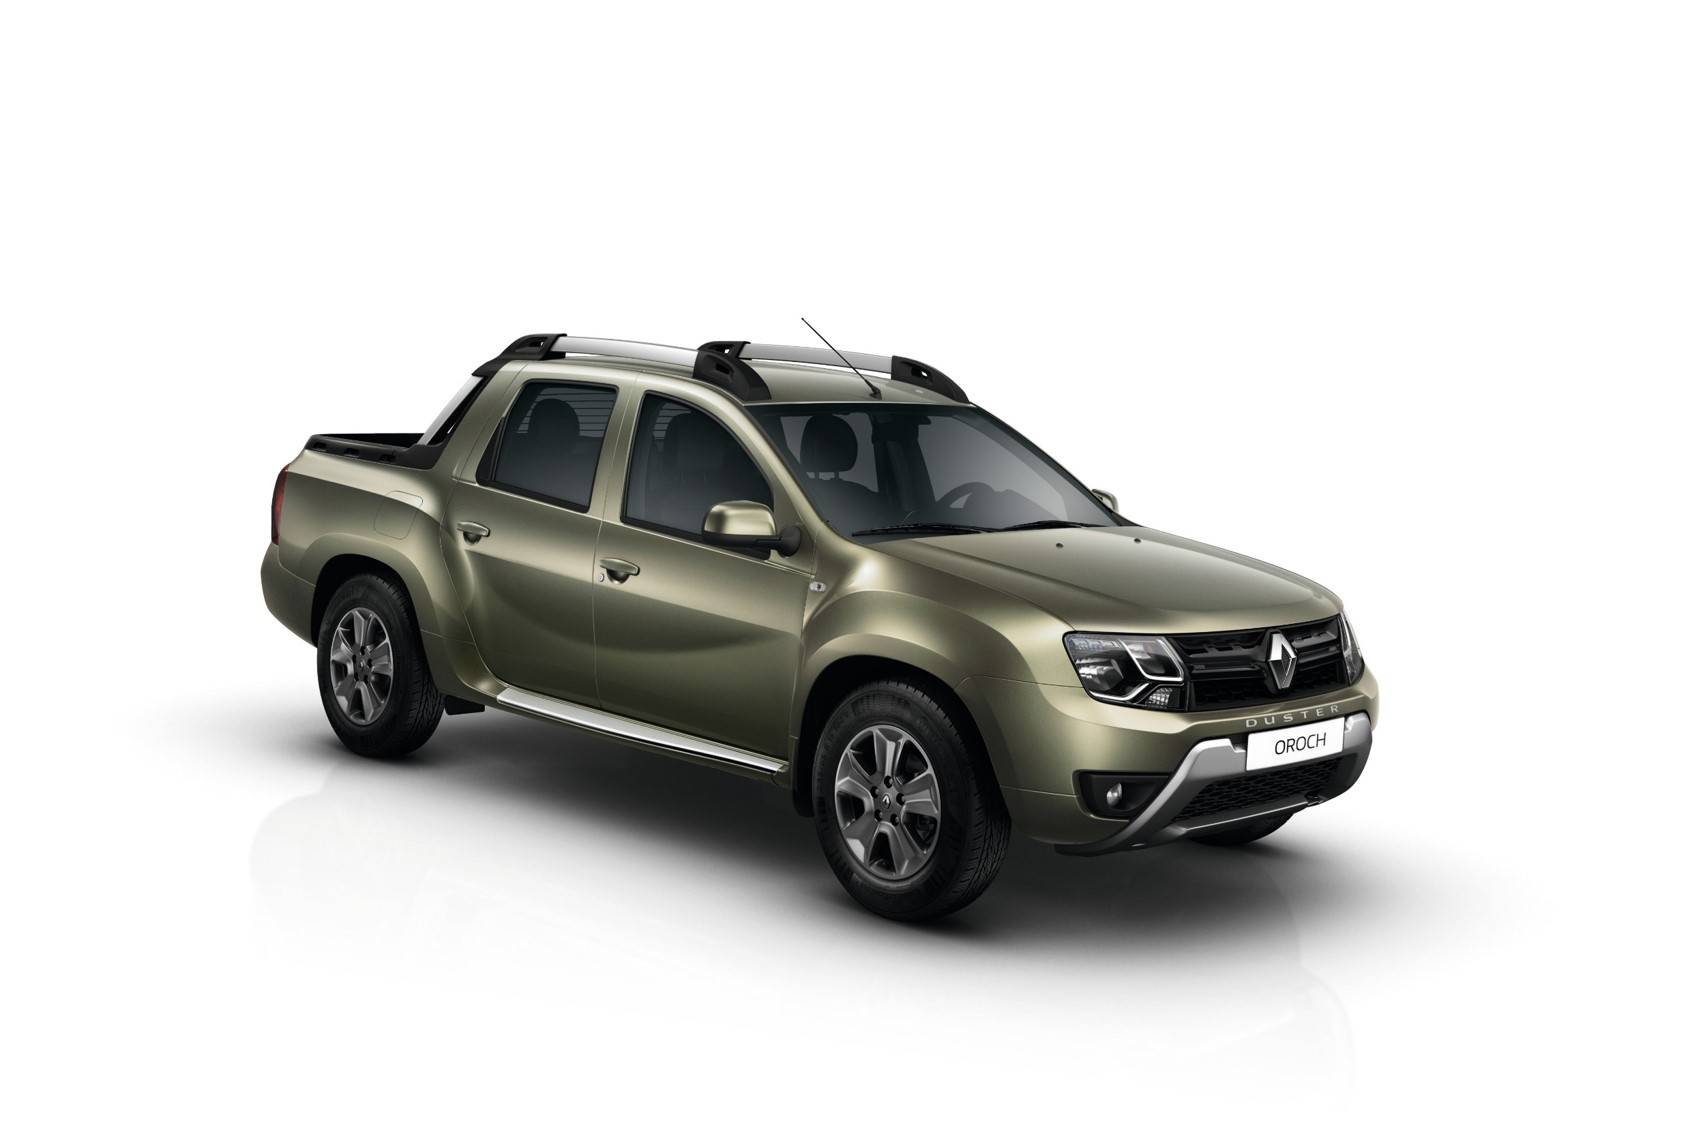 Дастер 2 1.6. Duster 2. Renault Duster 2.0l. Рено Дастер 142 л с. Renault Duster 2017.